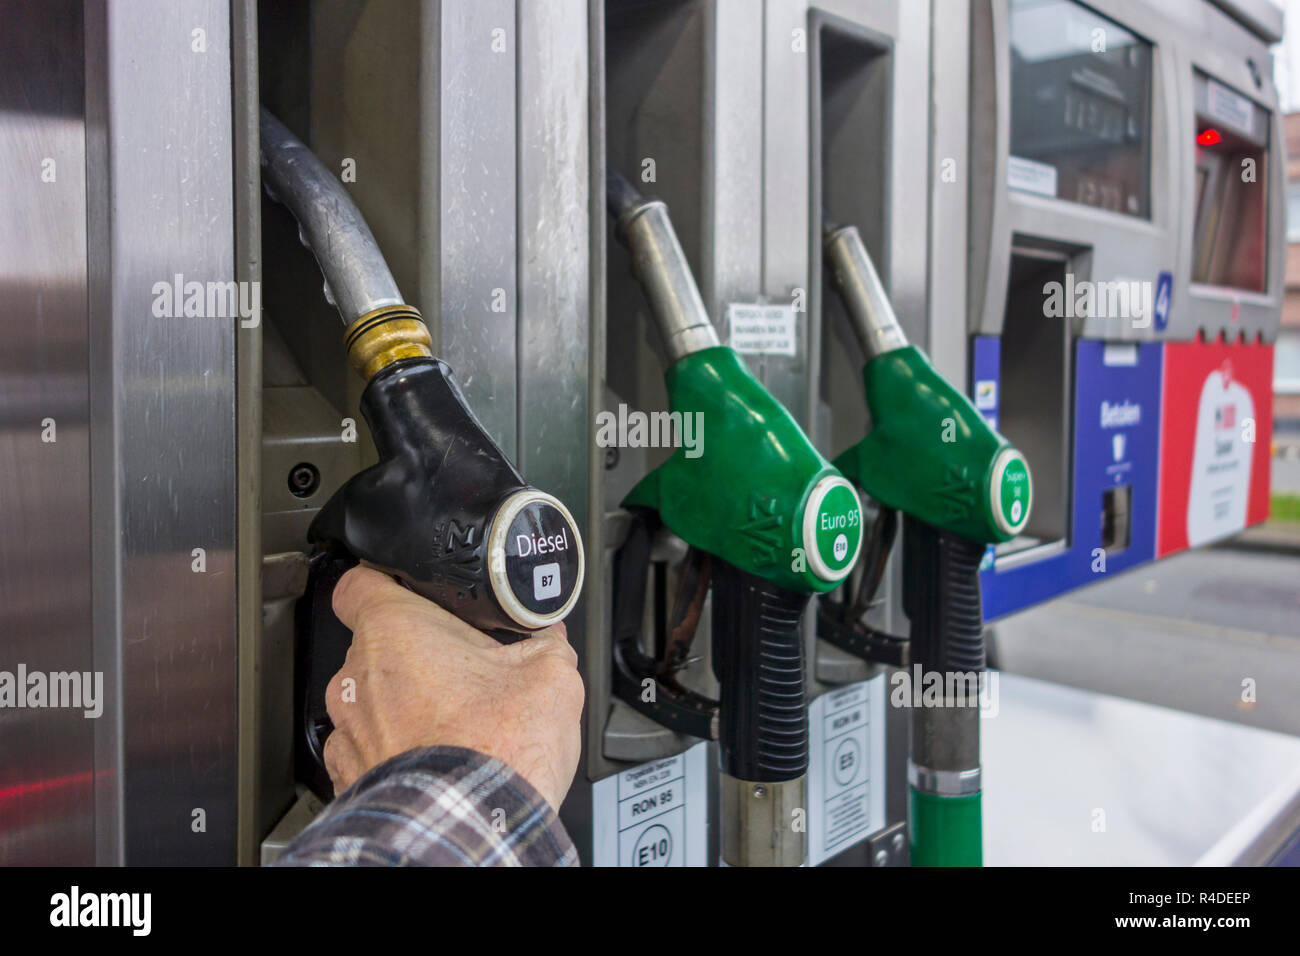 Man selecting diesel fuel pump nozzle at gas station for refueling his car in Europe Stock Photo